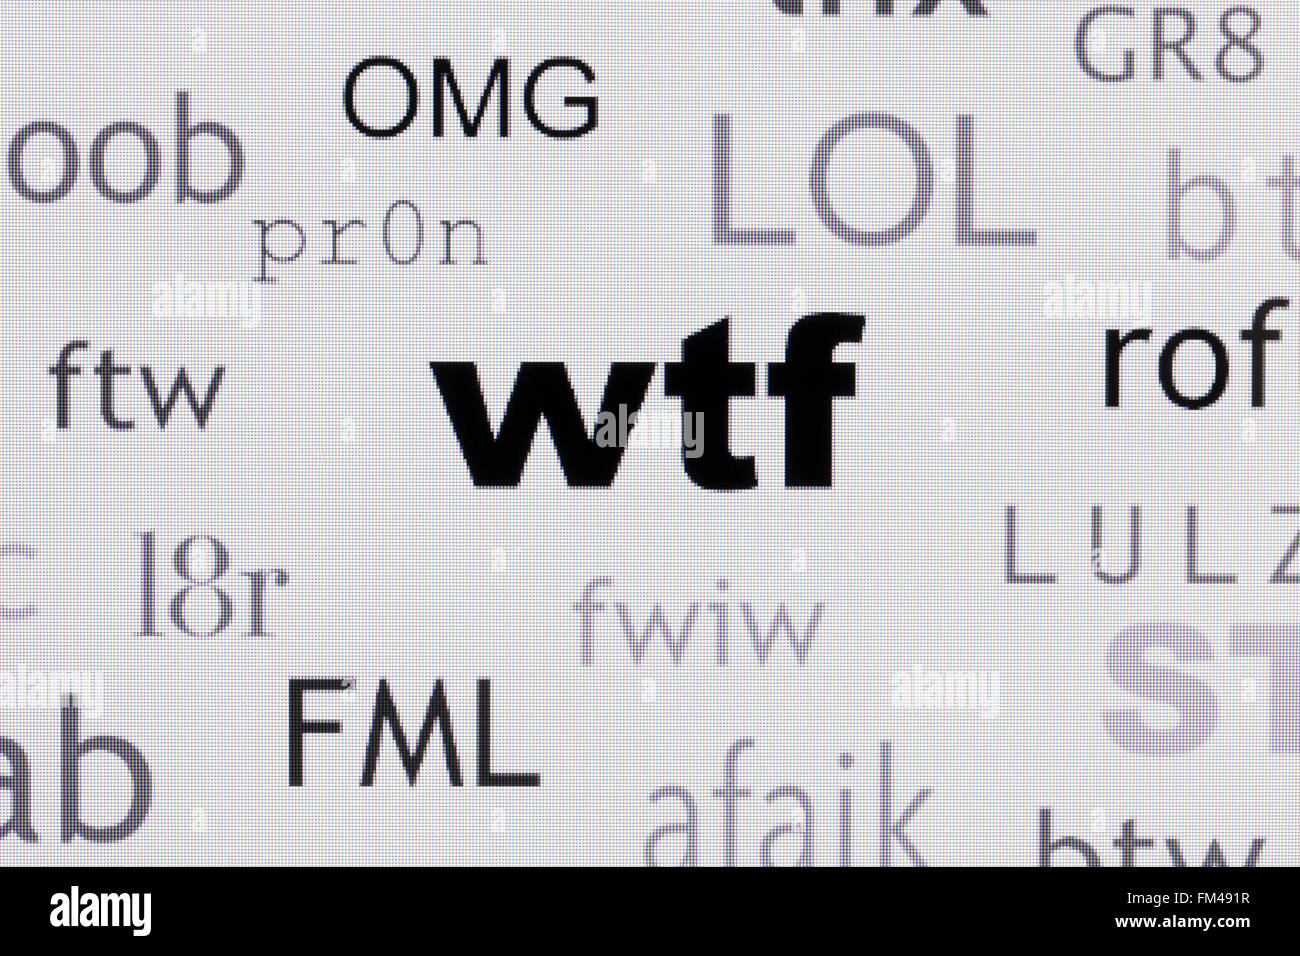 Word cloud of commonly used internet slang highlighting WTF - USA Stock Photo